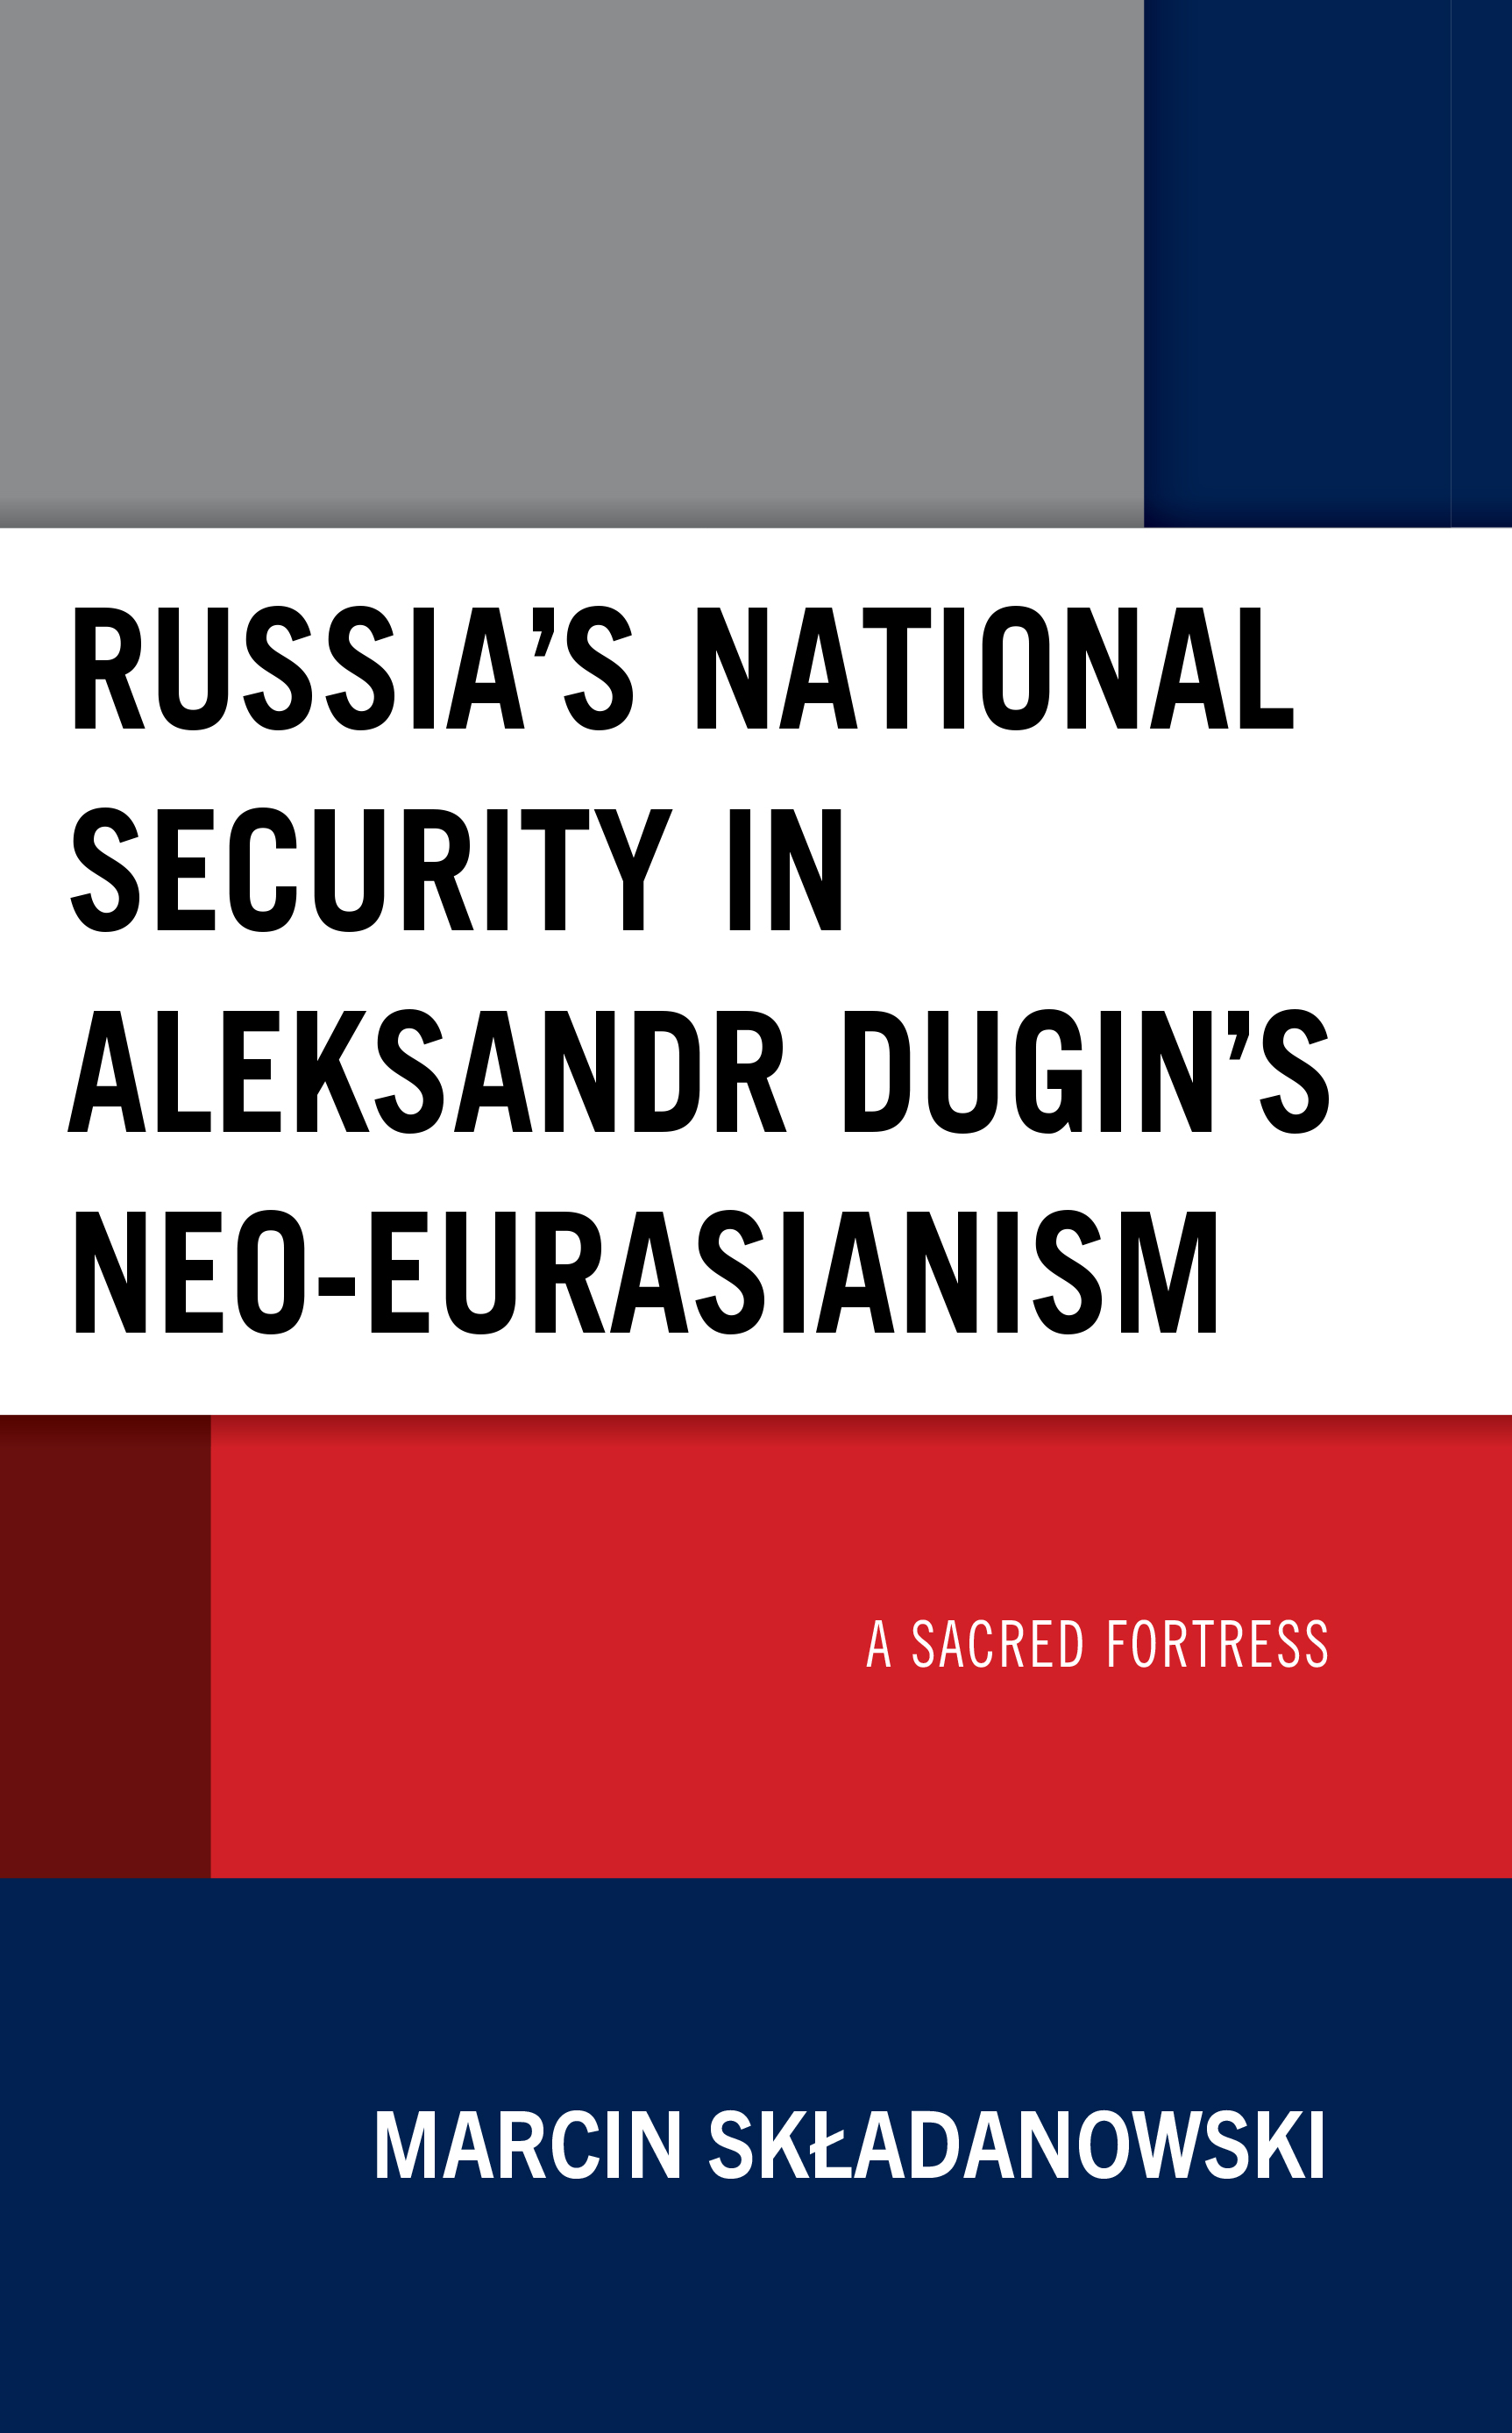 Russia’s National Security in Aleksandr Dugin’s Neo-Eurasianism: A Sacred Fortress